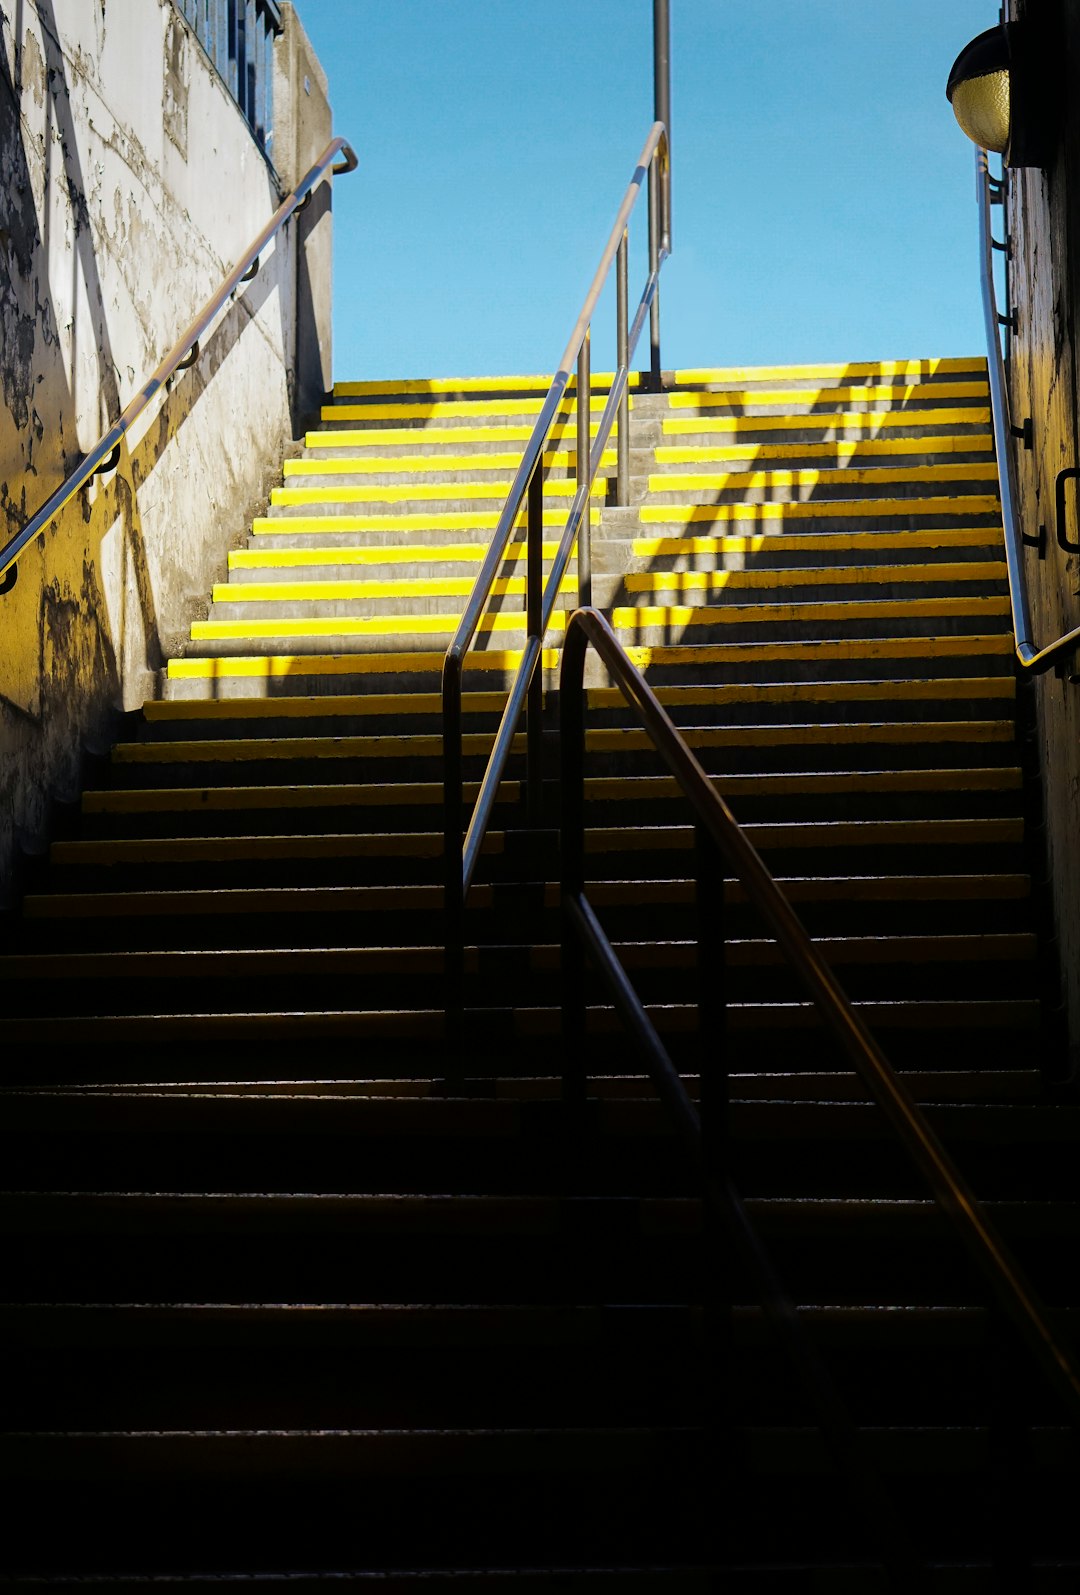 yellow and gray staircase during daytime